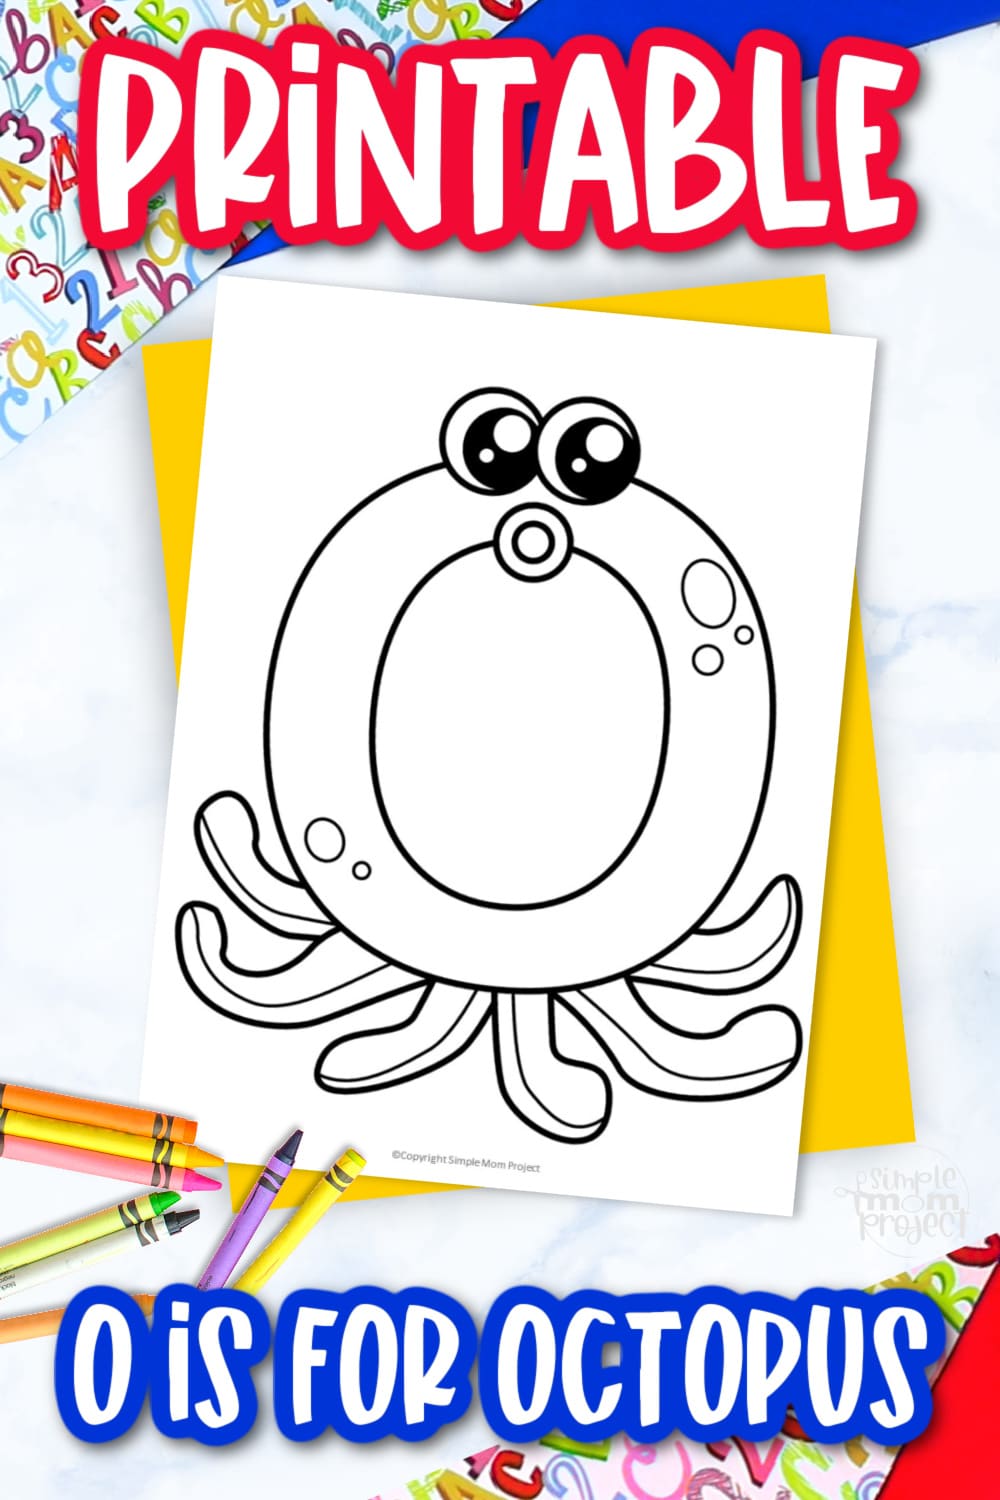 Free printable letter o coloring page â simple mom project